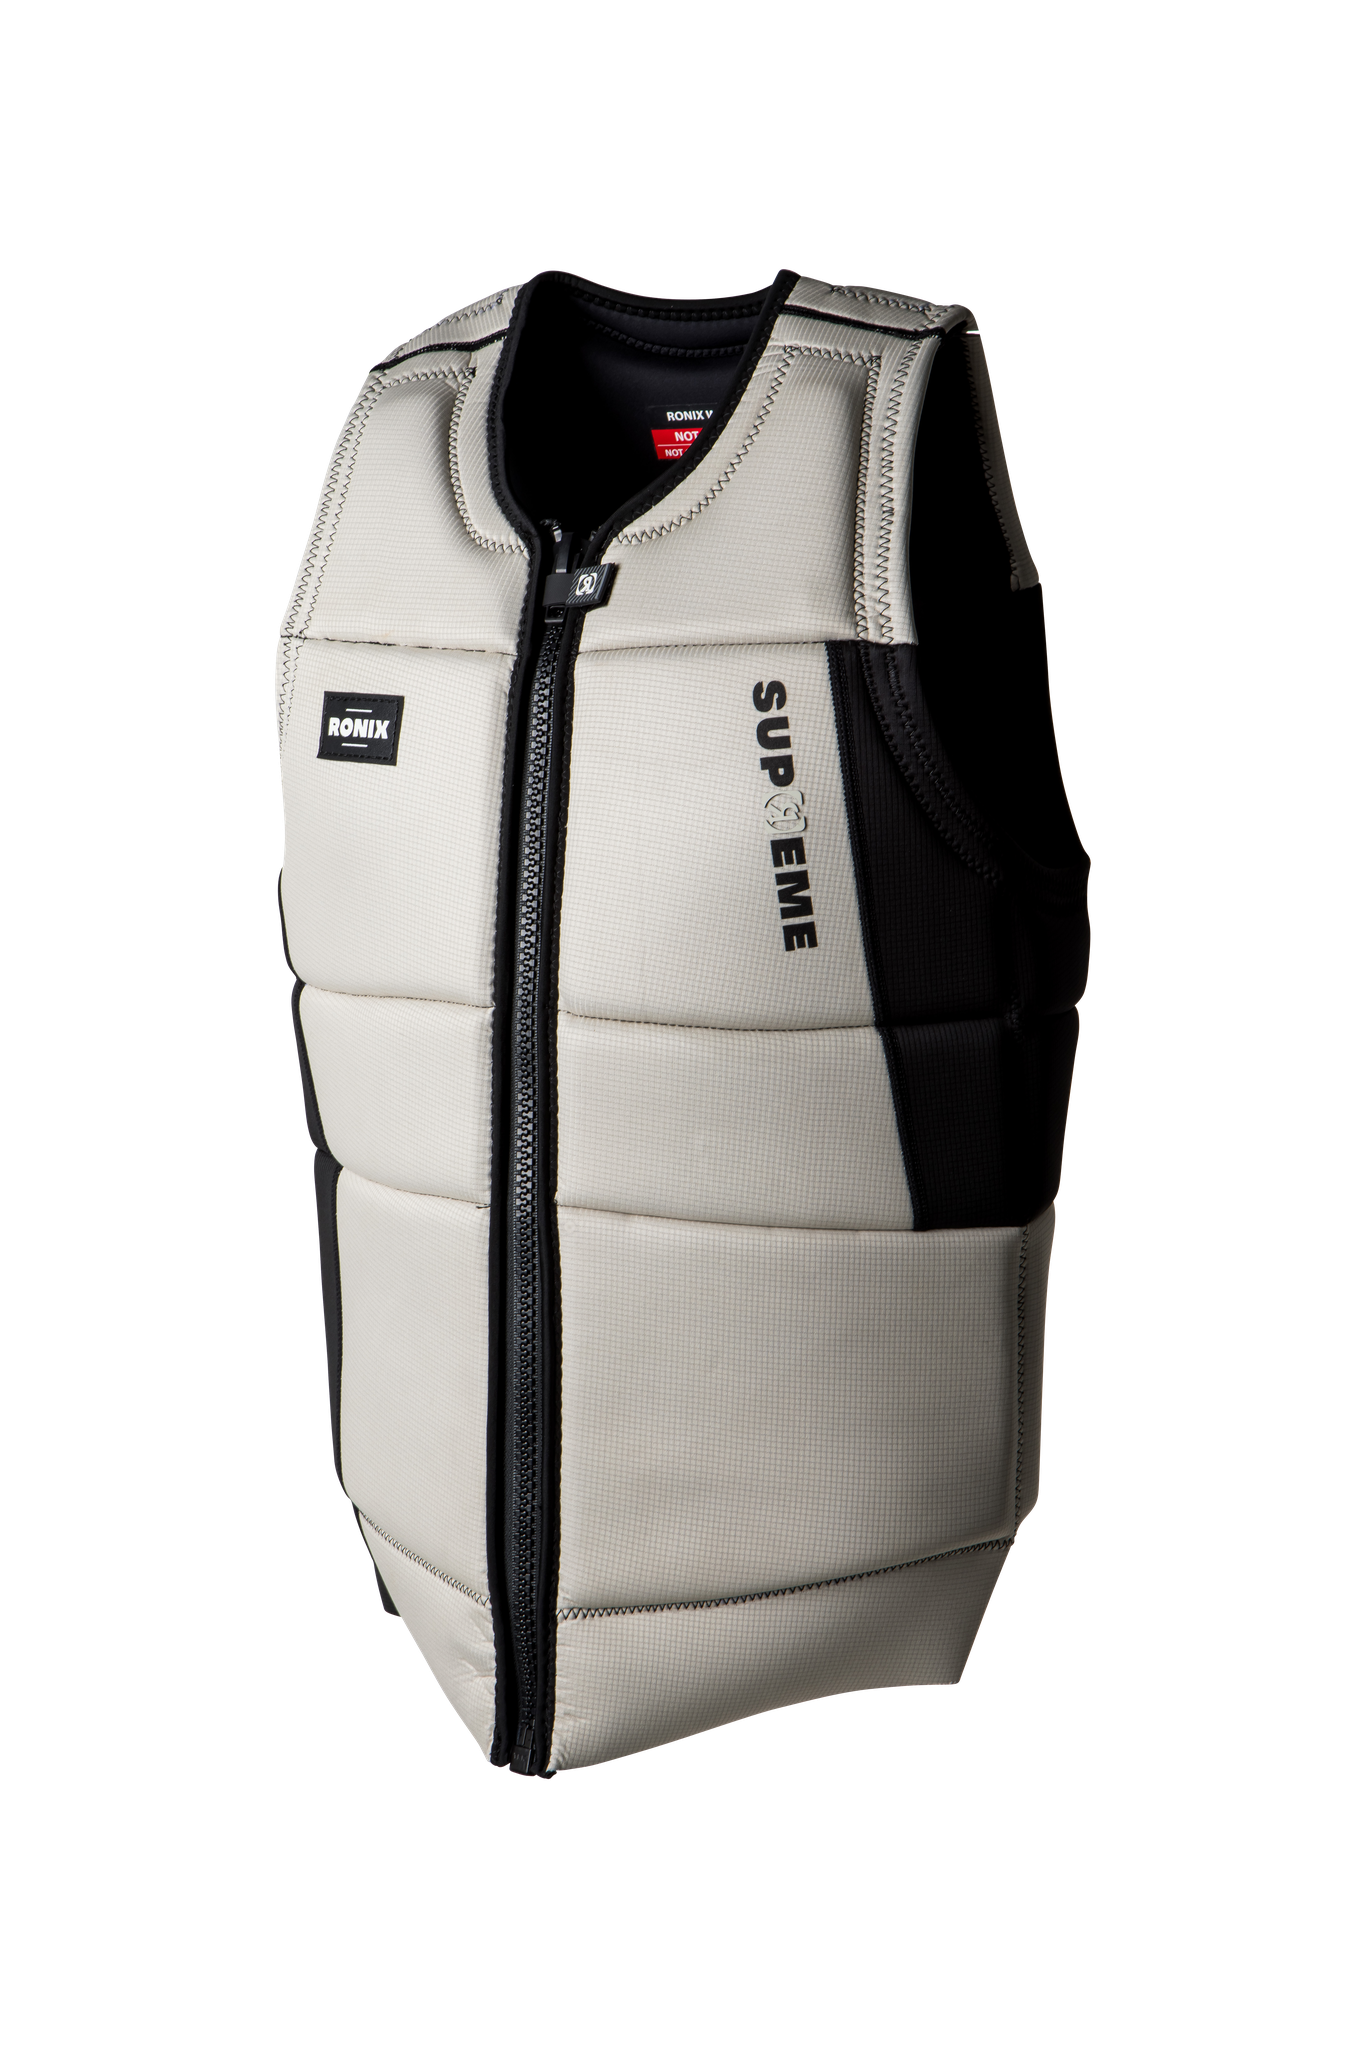 A Ronix 2024 Supreme CE Approved Impact Vest, designed to provide impact protection, showcased against a sleek black background.